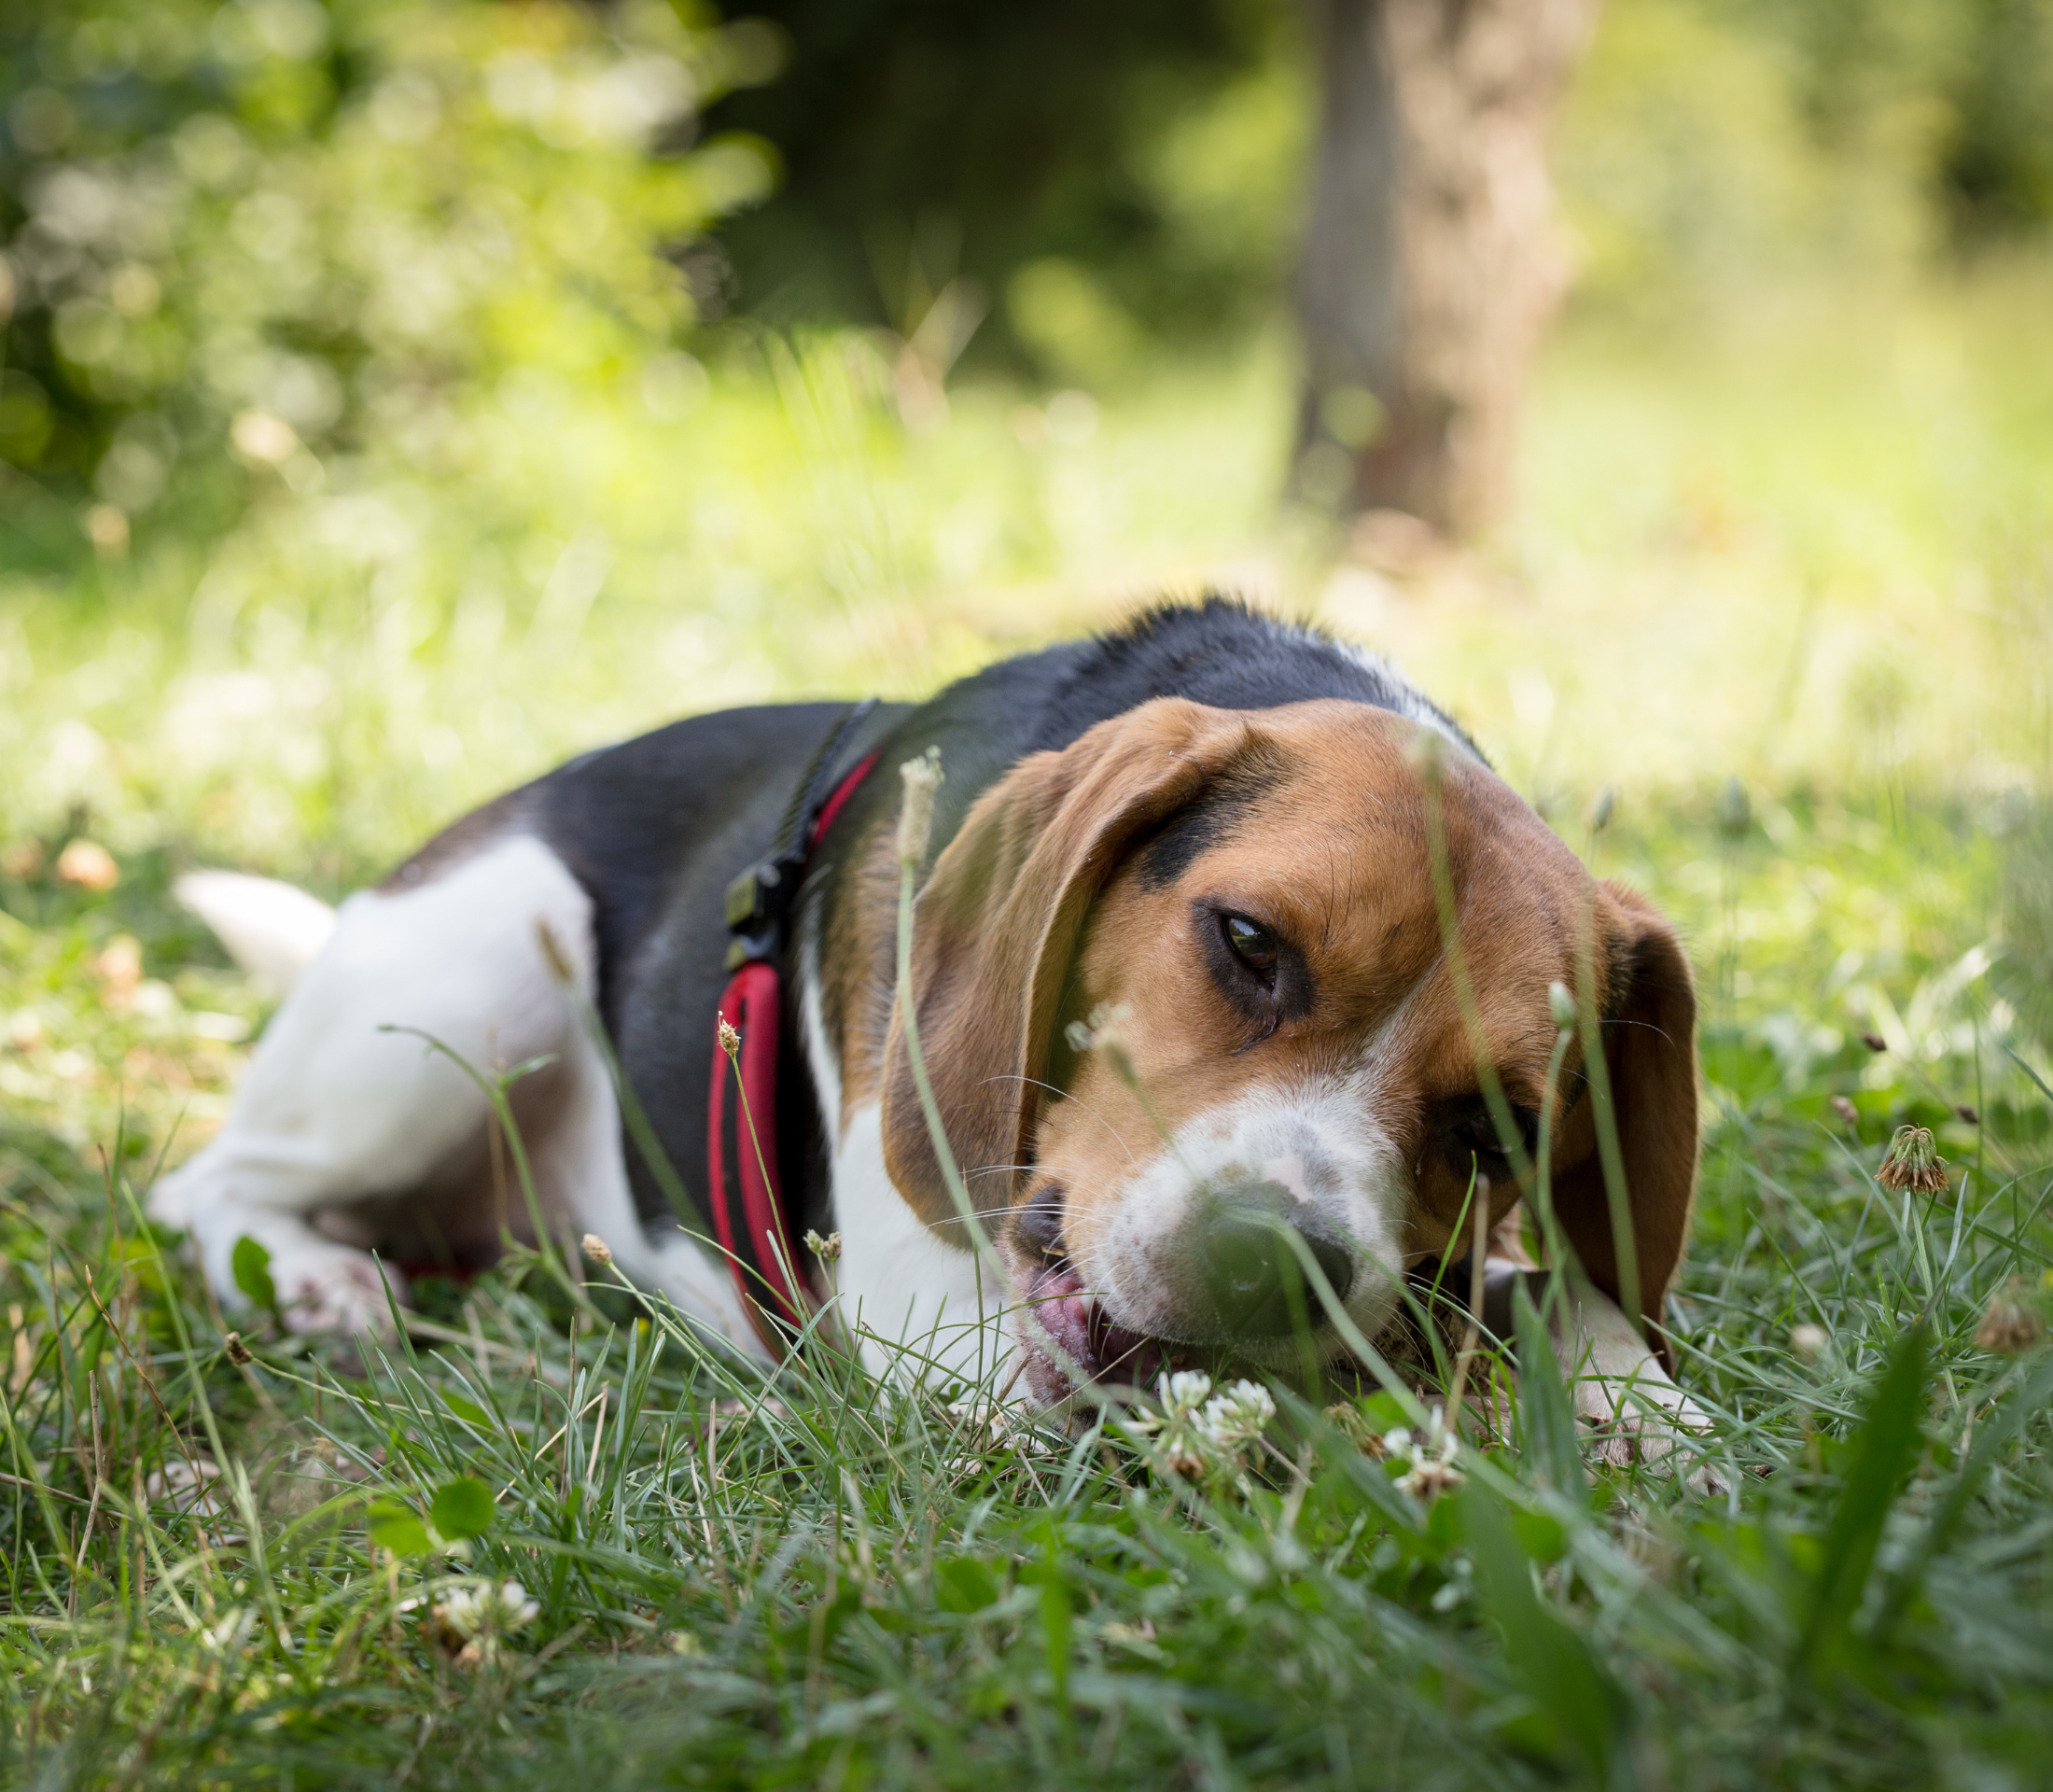 Dog with brown ears nipping on something on the grass